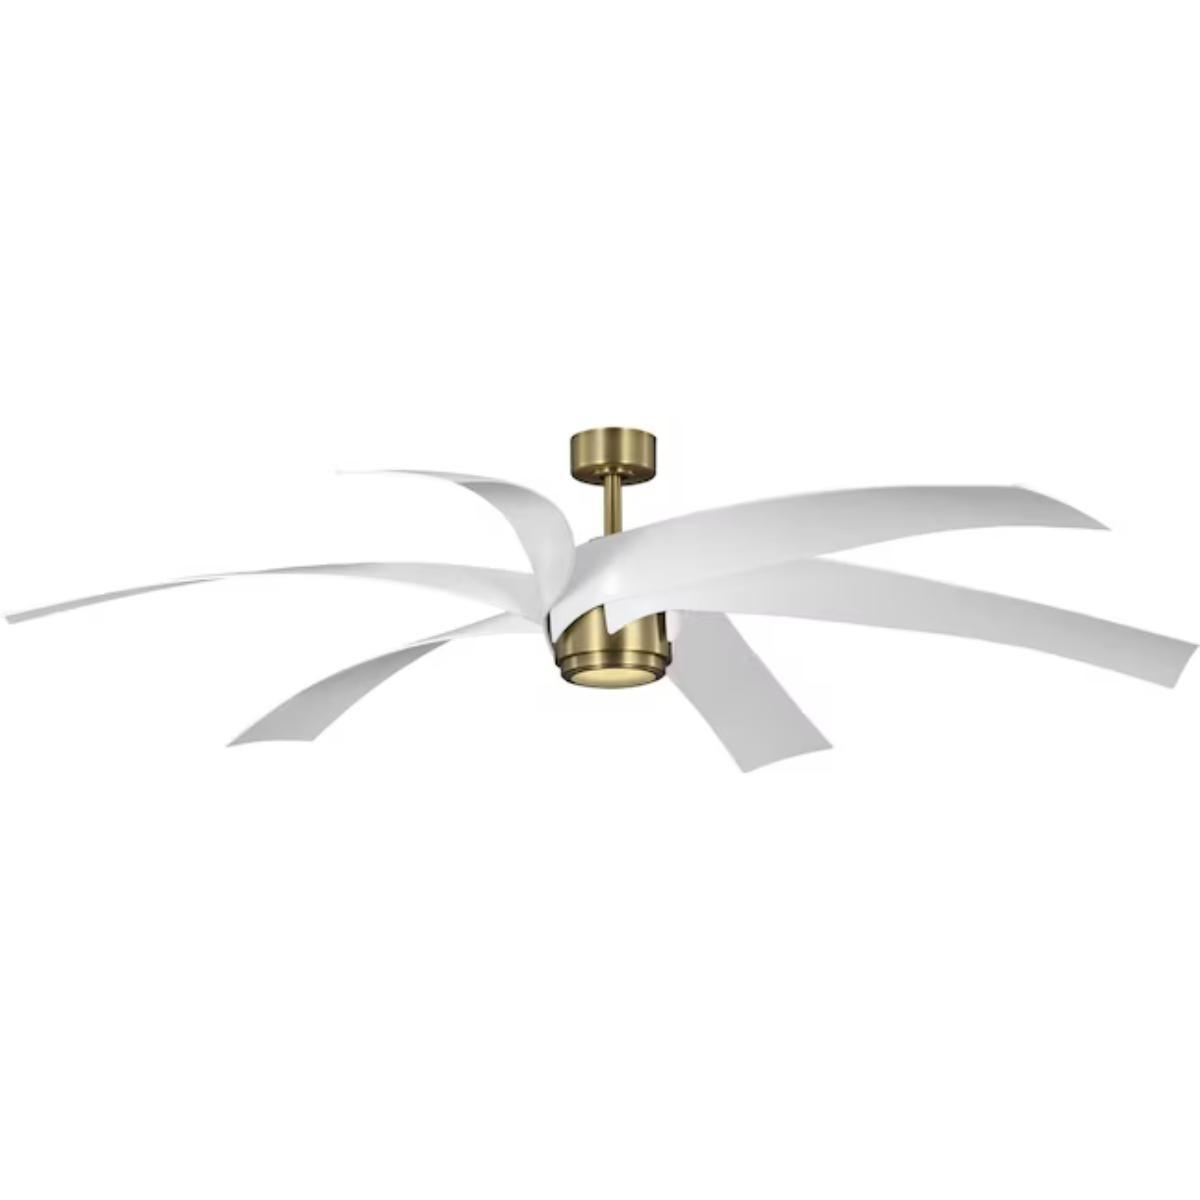 Insigna 72 Inch LED Ceiling Fan with Light Kit and Remote, Vintage Brass with Matte White Blades - Bees Lighting